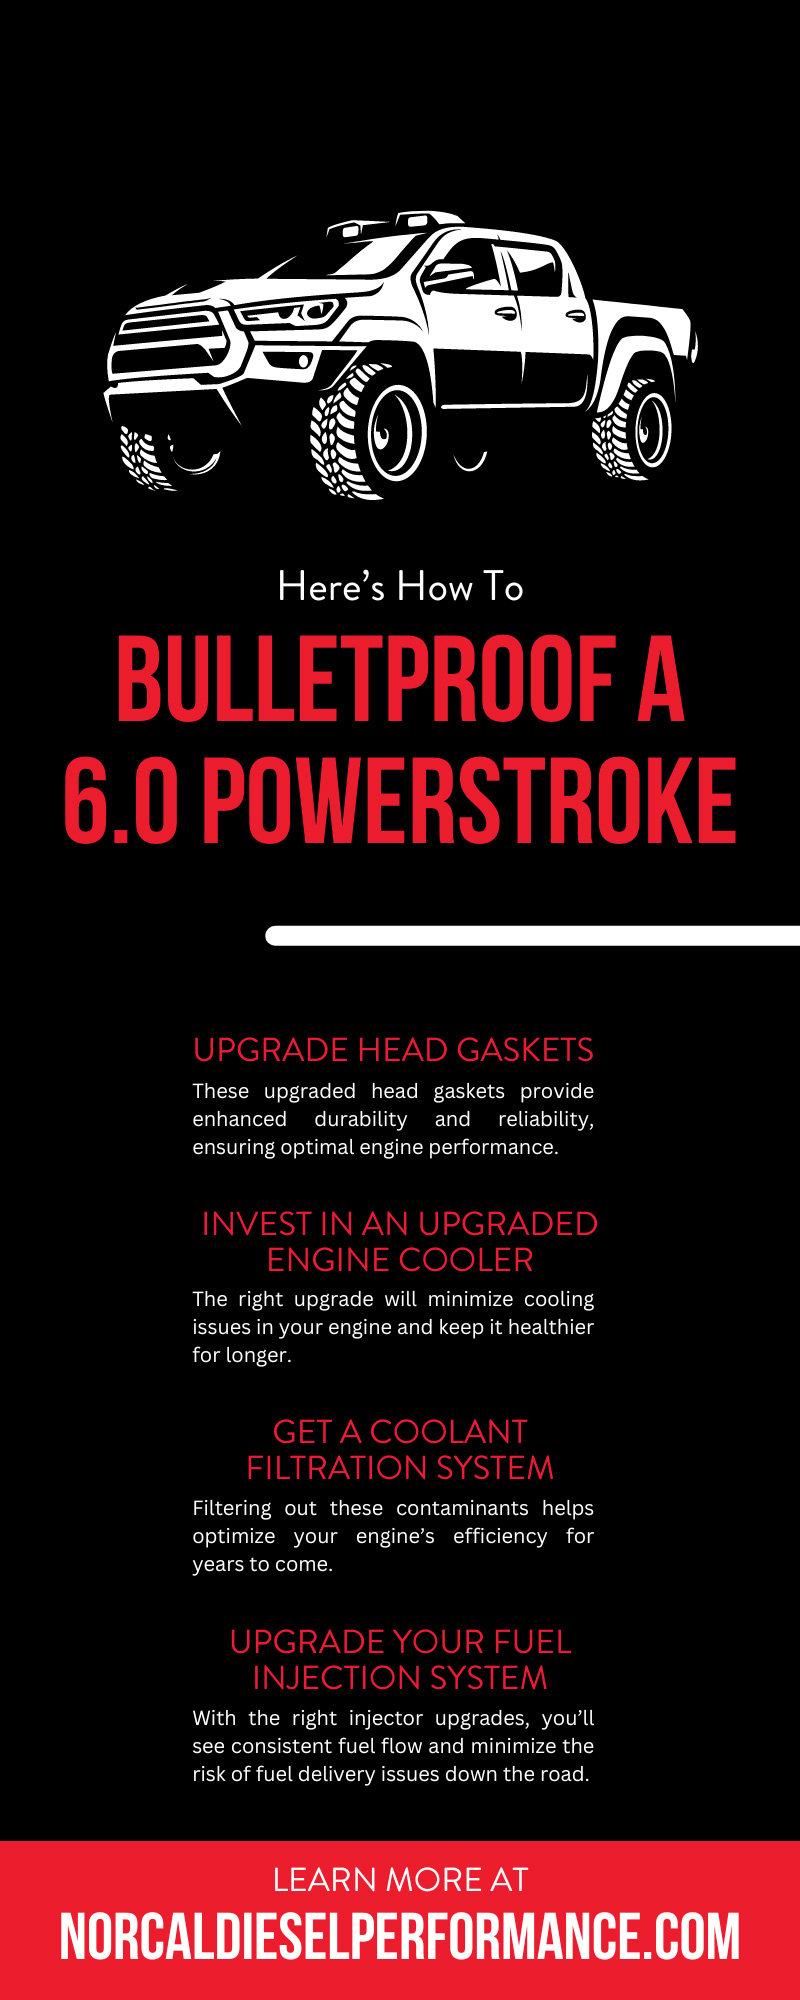 Here’s How To Bulletproof a 6.0 Powerstroke